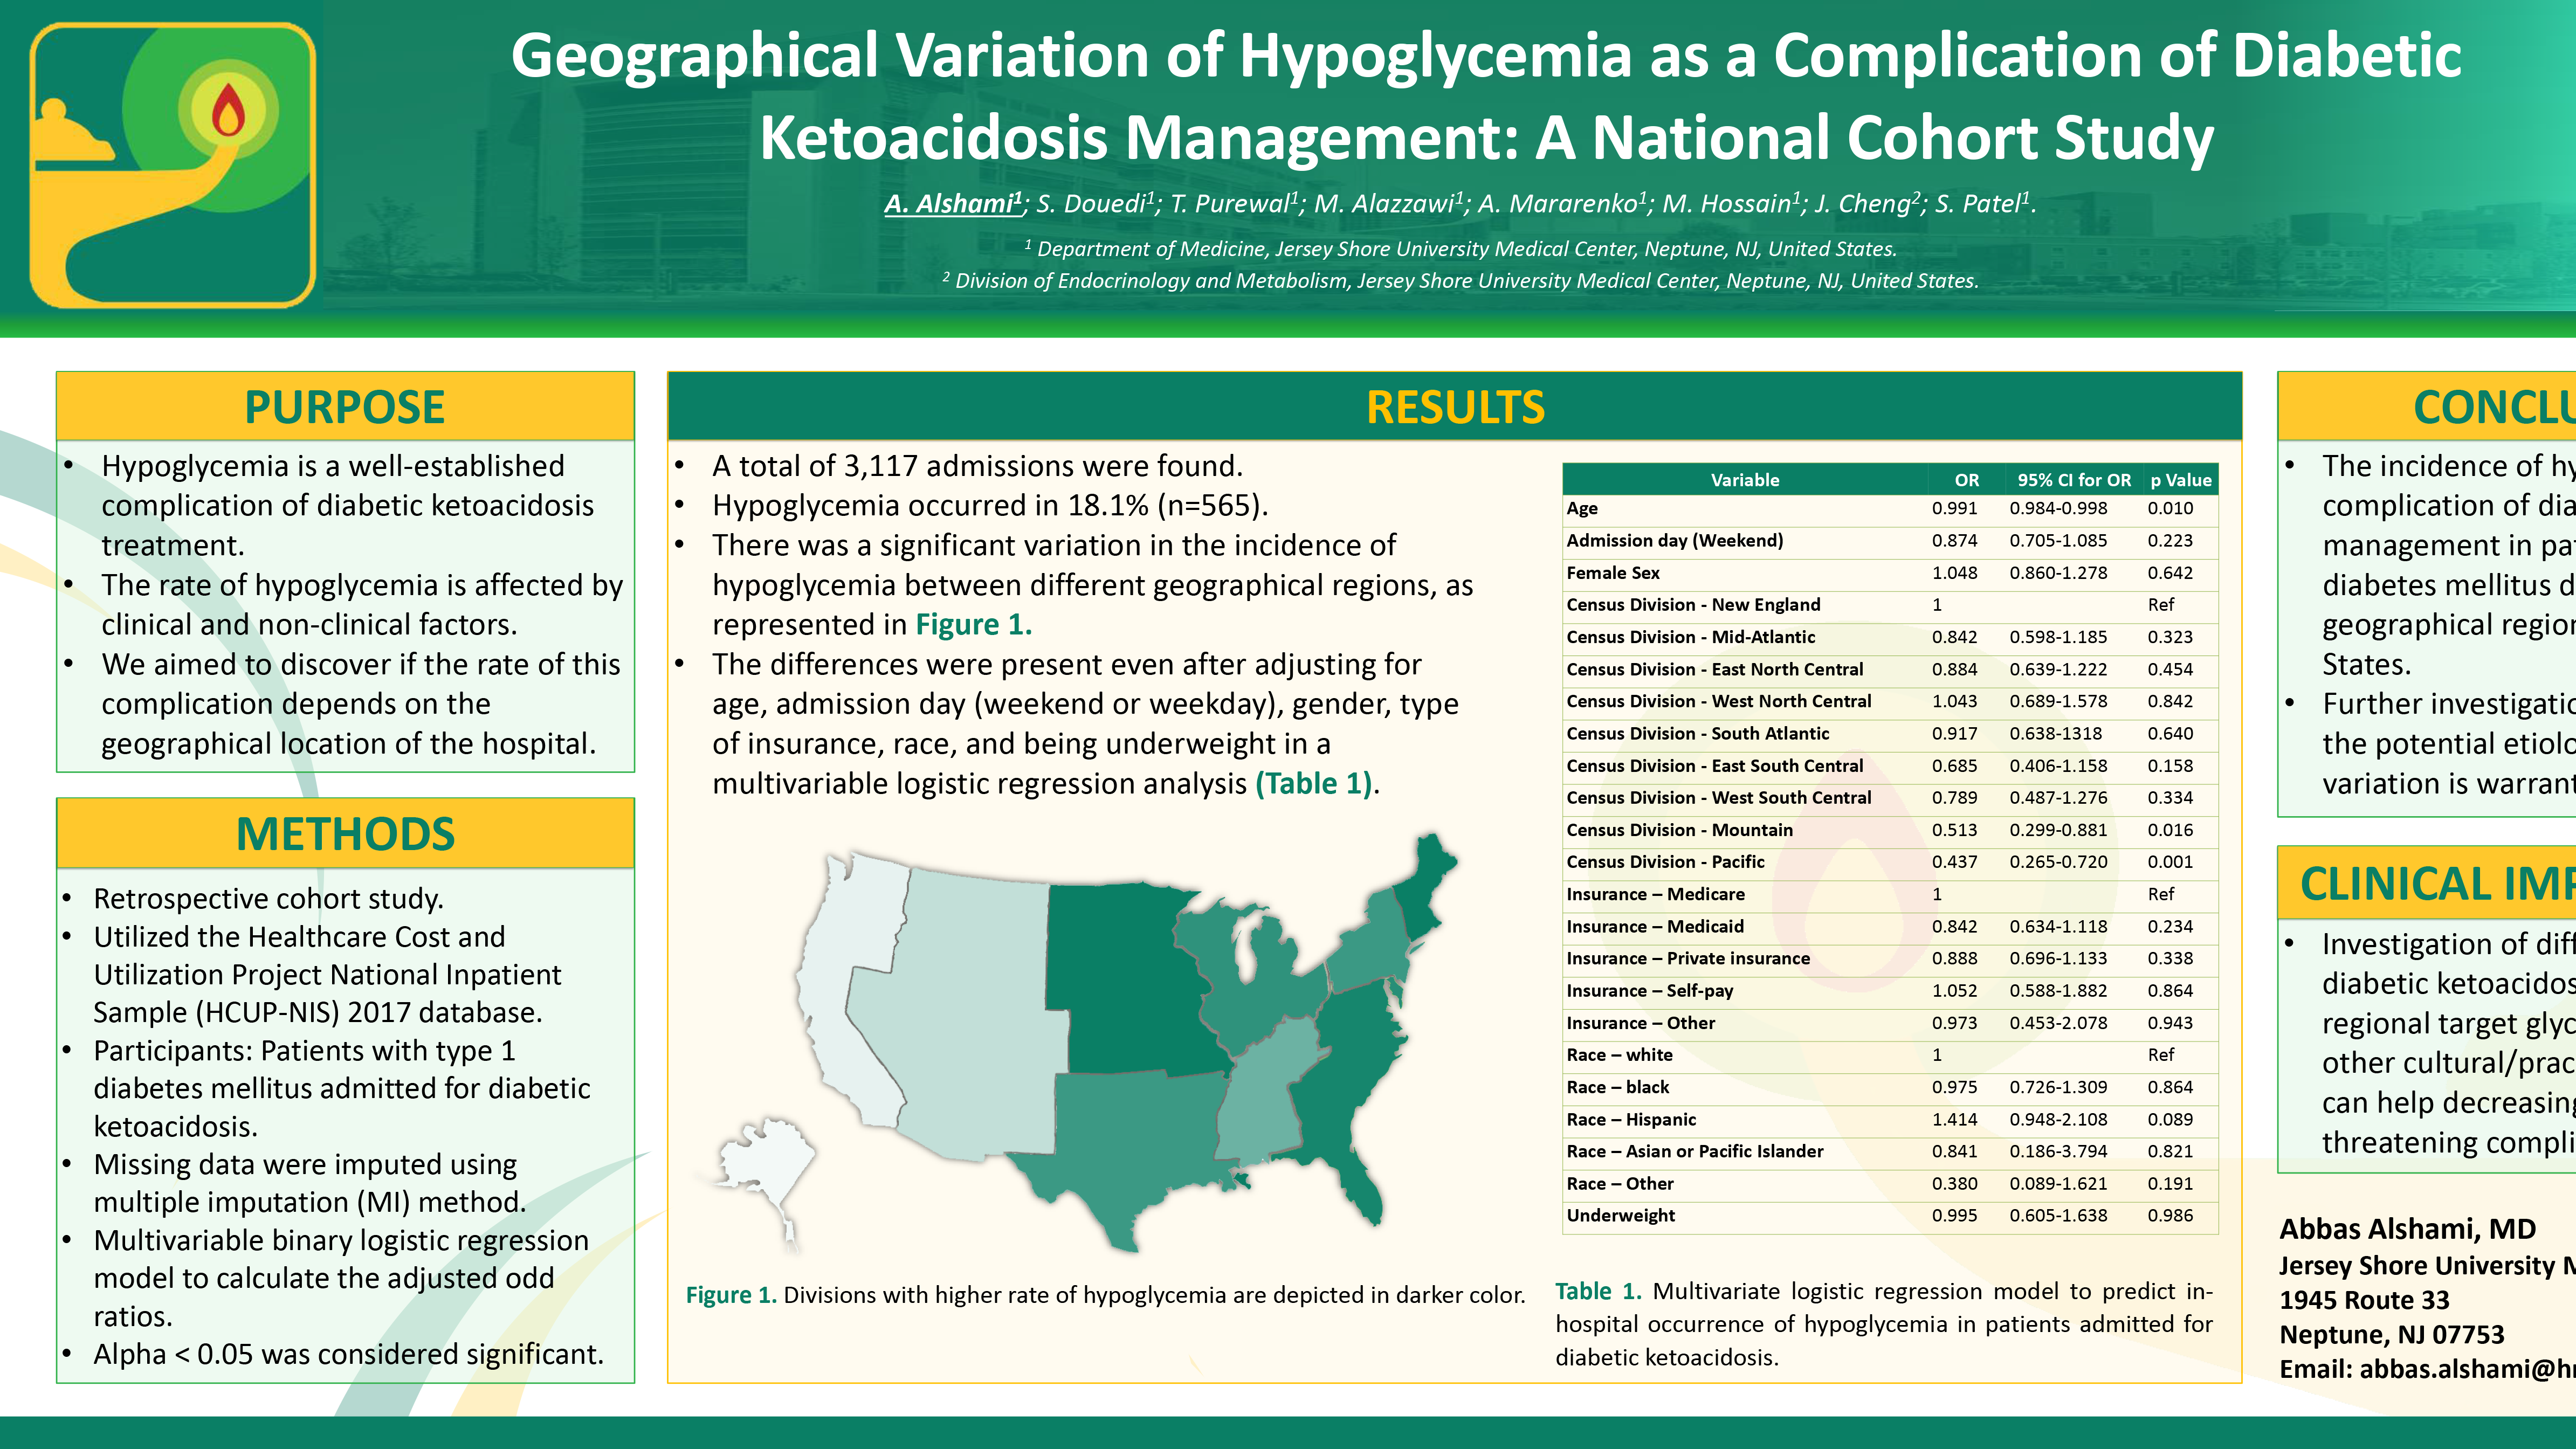 1-R-1-Geographical Variation of Hypoglycemia as a Complication of Diabetic Ketoacidosis Management